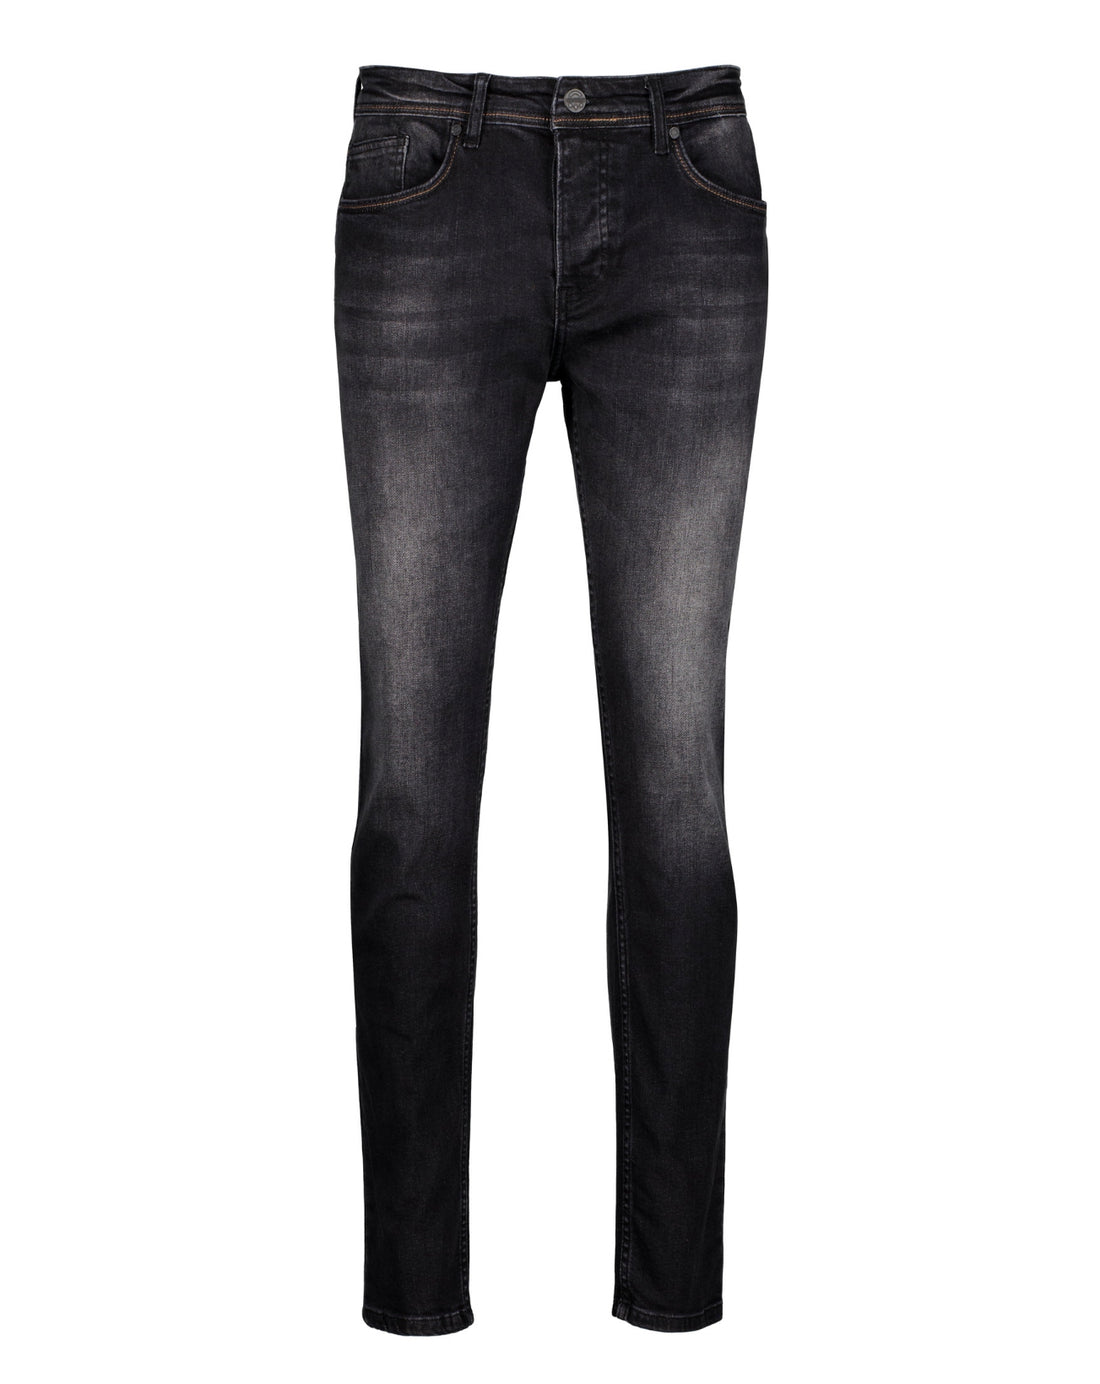 The Loca Grey Classic Jeans - Jeans by Urbbana